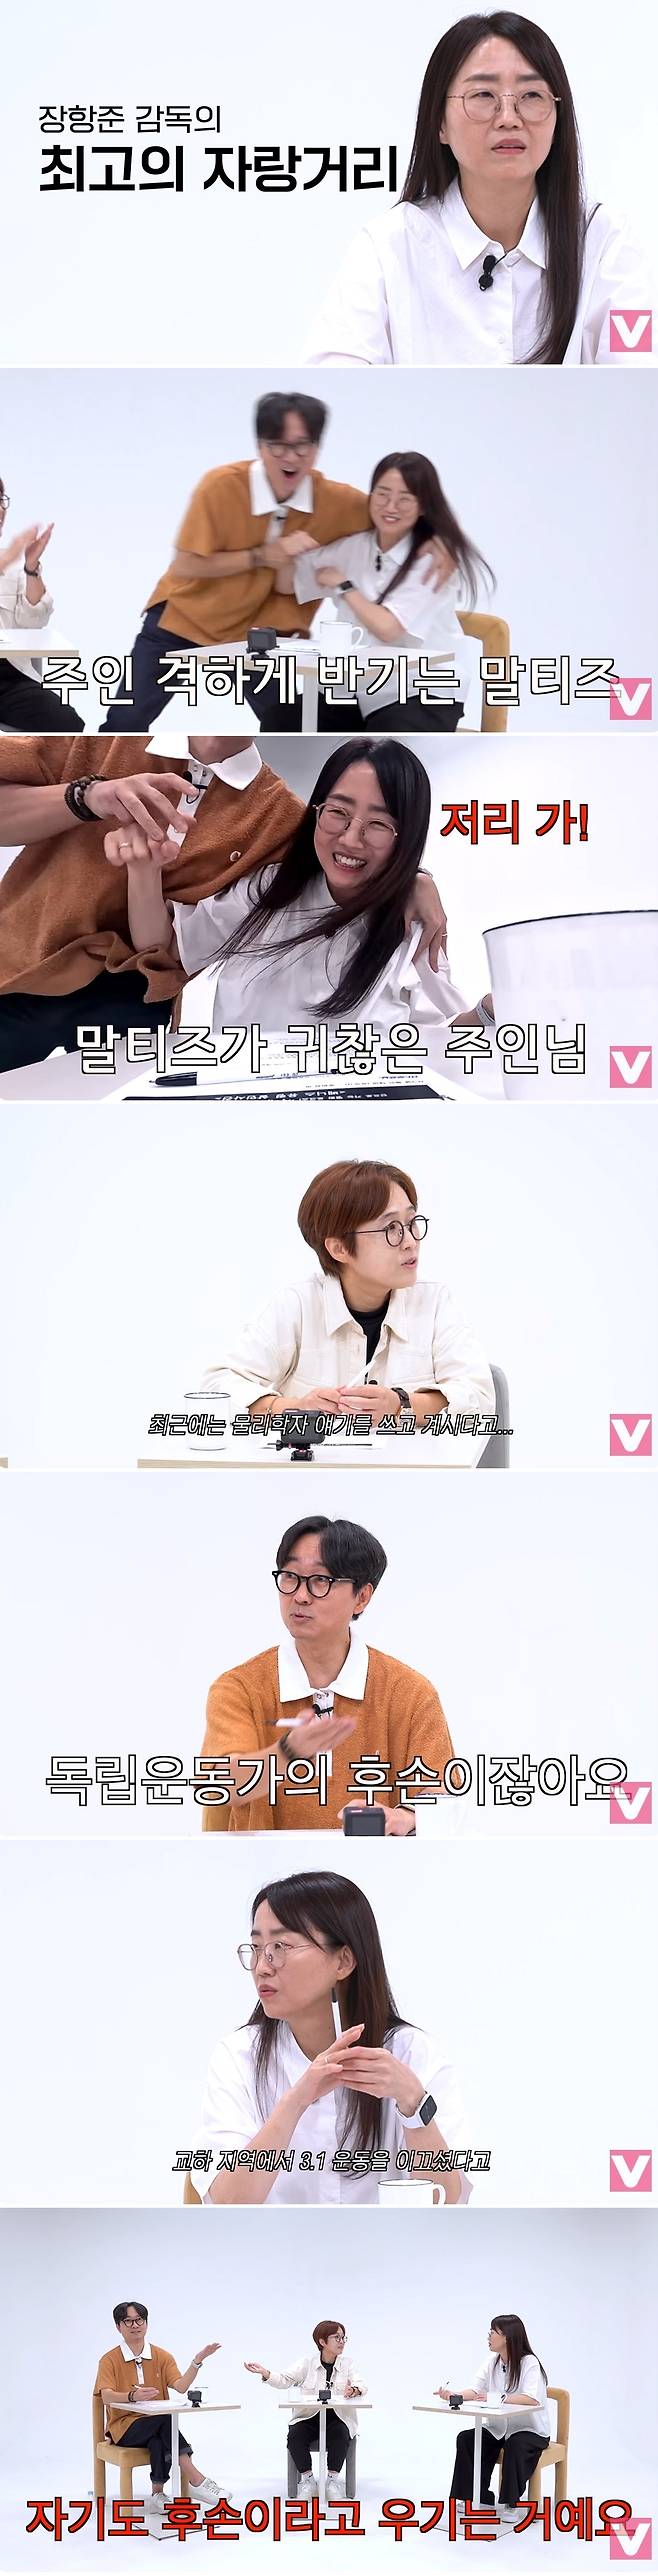 Kim Eun-hee hinted at her next film.On September 14, the official channel of VIVO TV (VIVO TV) posted a Cine Mountain special video titled Korean Agatha Christie Kim Eun-hee.. Im looking for an adoption place.Kim Eun-hee, who finished writing the SBS drama a demon on July 29, said, I am writing a Physicist story now.Kim Eun-hee husband and film director Jang Hang-jun said, To be precise, a physicist invents a time machine as a result of research. This person returns to the moment of history and churdan the Betrayed.Kim Eun-hee is also a descendant of the Korean independence movement.Kim Eun-hee said, I was surprised, too. He led the March 1st Movement in the Gyoha area, adding, Because he married me, he insists that he is also a descendant.Jang Hang-jun said, Isnt that right? I got married and became a member of the Kim family. Thats why Im a descendant of the Korean independence movement.MC Song Eun said, So I want to write a work that reflects the spirit of the times inspired by such things.Kim Eun-hee replied, I would like to continue to be interested in how the society we live in is created rather than the spirit of the times.Jang Hang-jun is also set to release his new film, Open the Door, which he wrote and directed.Its a shocking and sad story that took place in our Korean community more than 10 years ago. It was first unveiled at the Busan Film Festival last year, and Im looking forward to it because the response is okay, he explained.